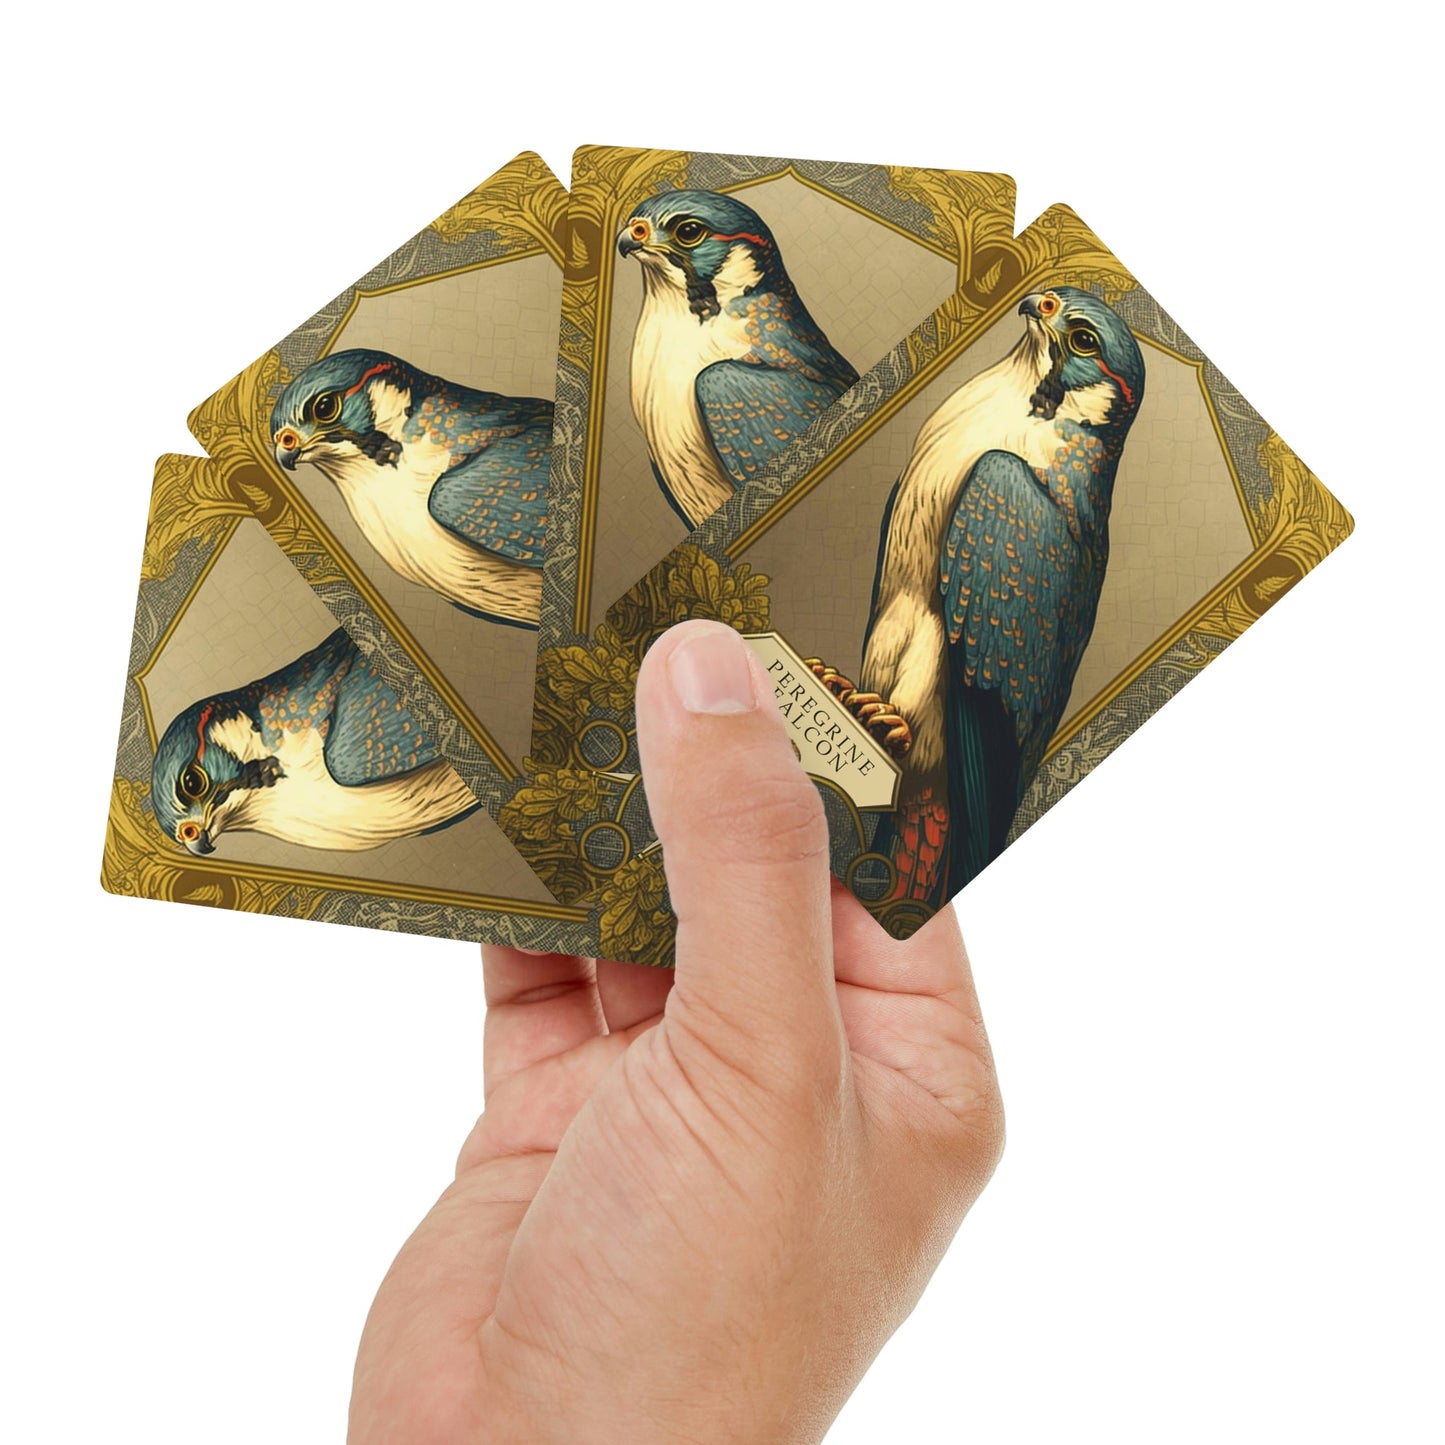 Peregrine Falcon IV - Mucha Style - Poker Playing Cards